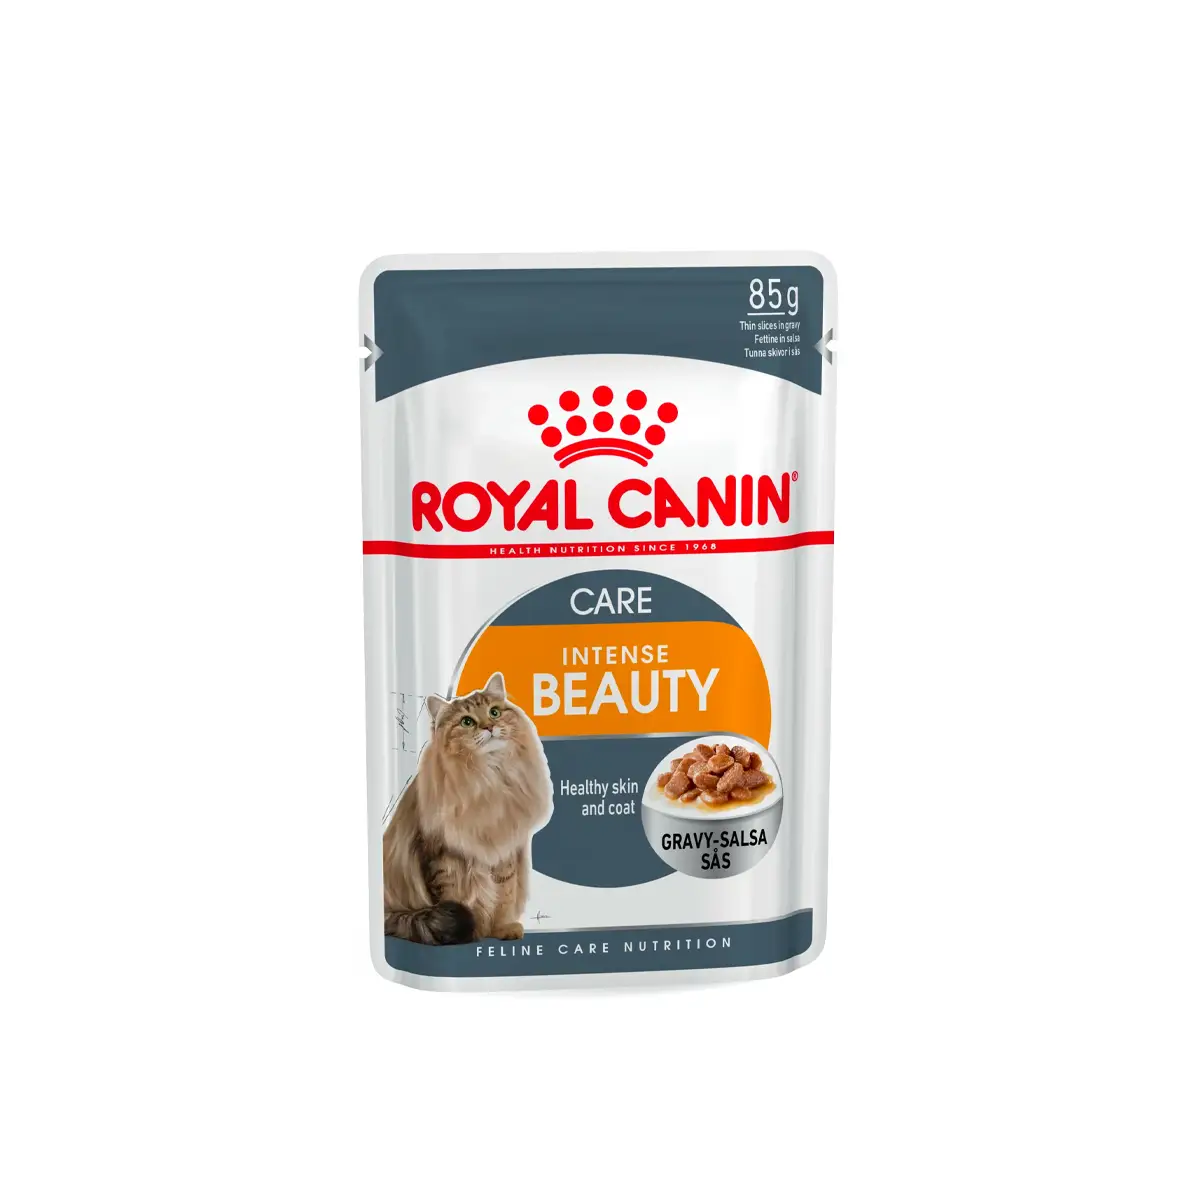 Royal Canin - Care Intense Beauty Wet Food In Gravy 85g